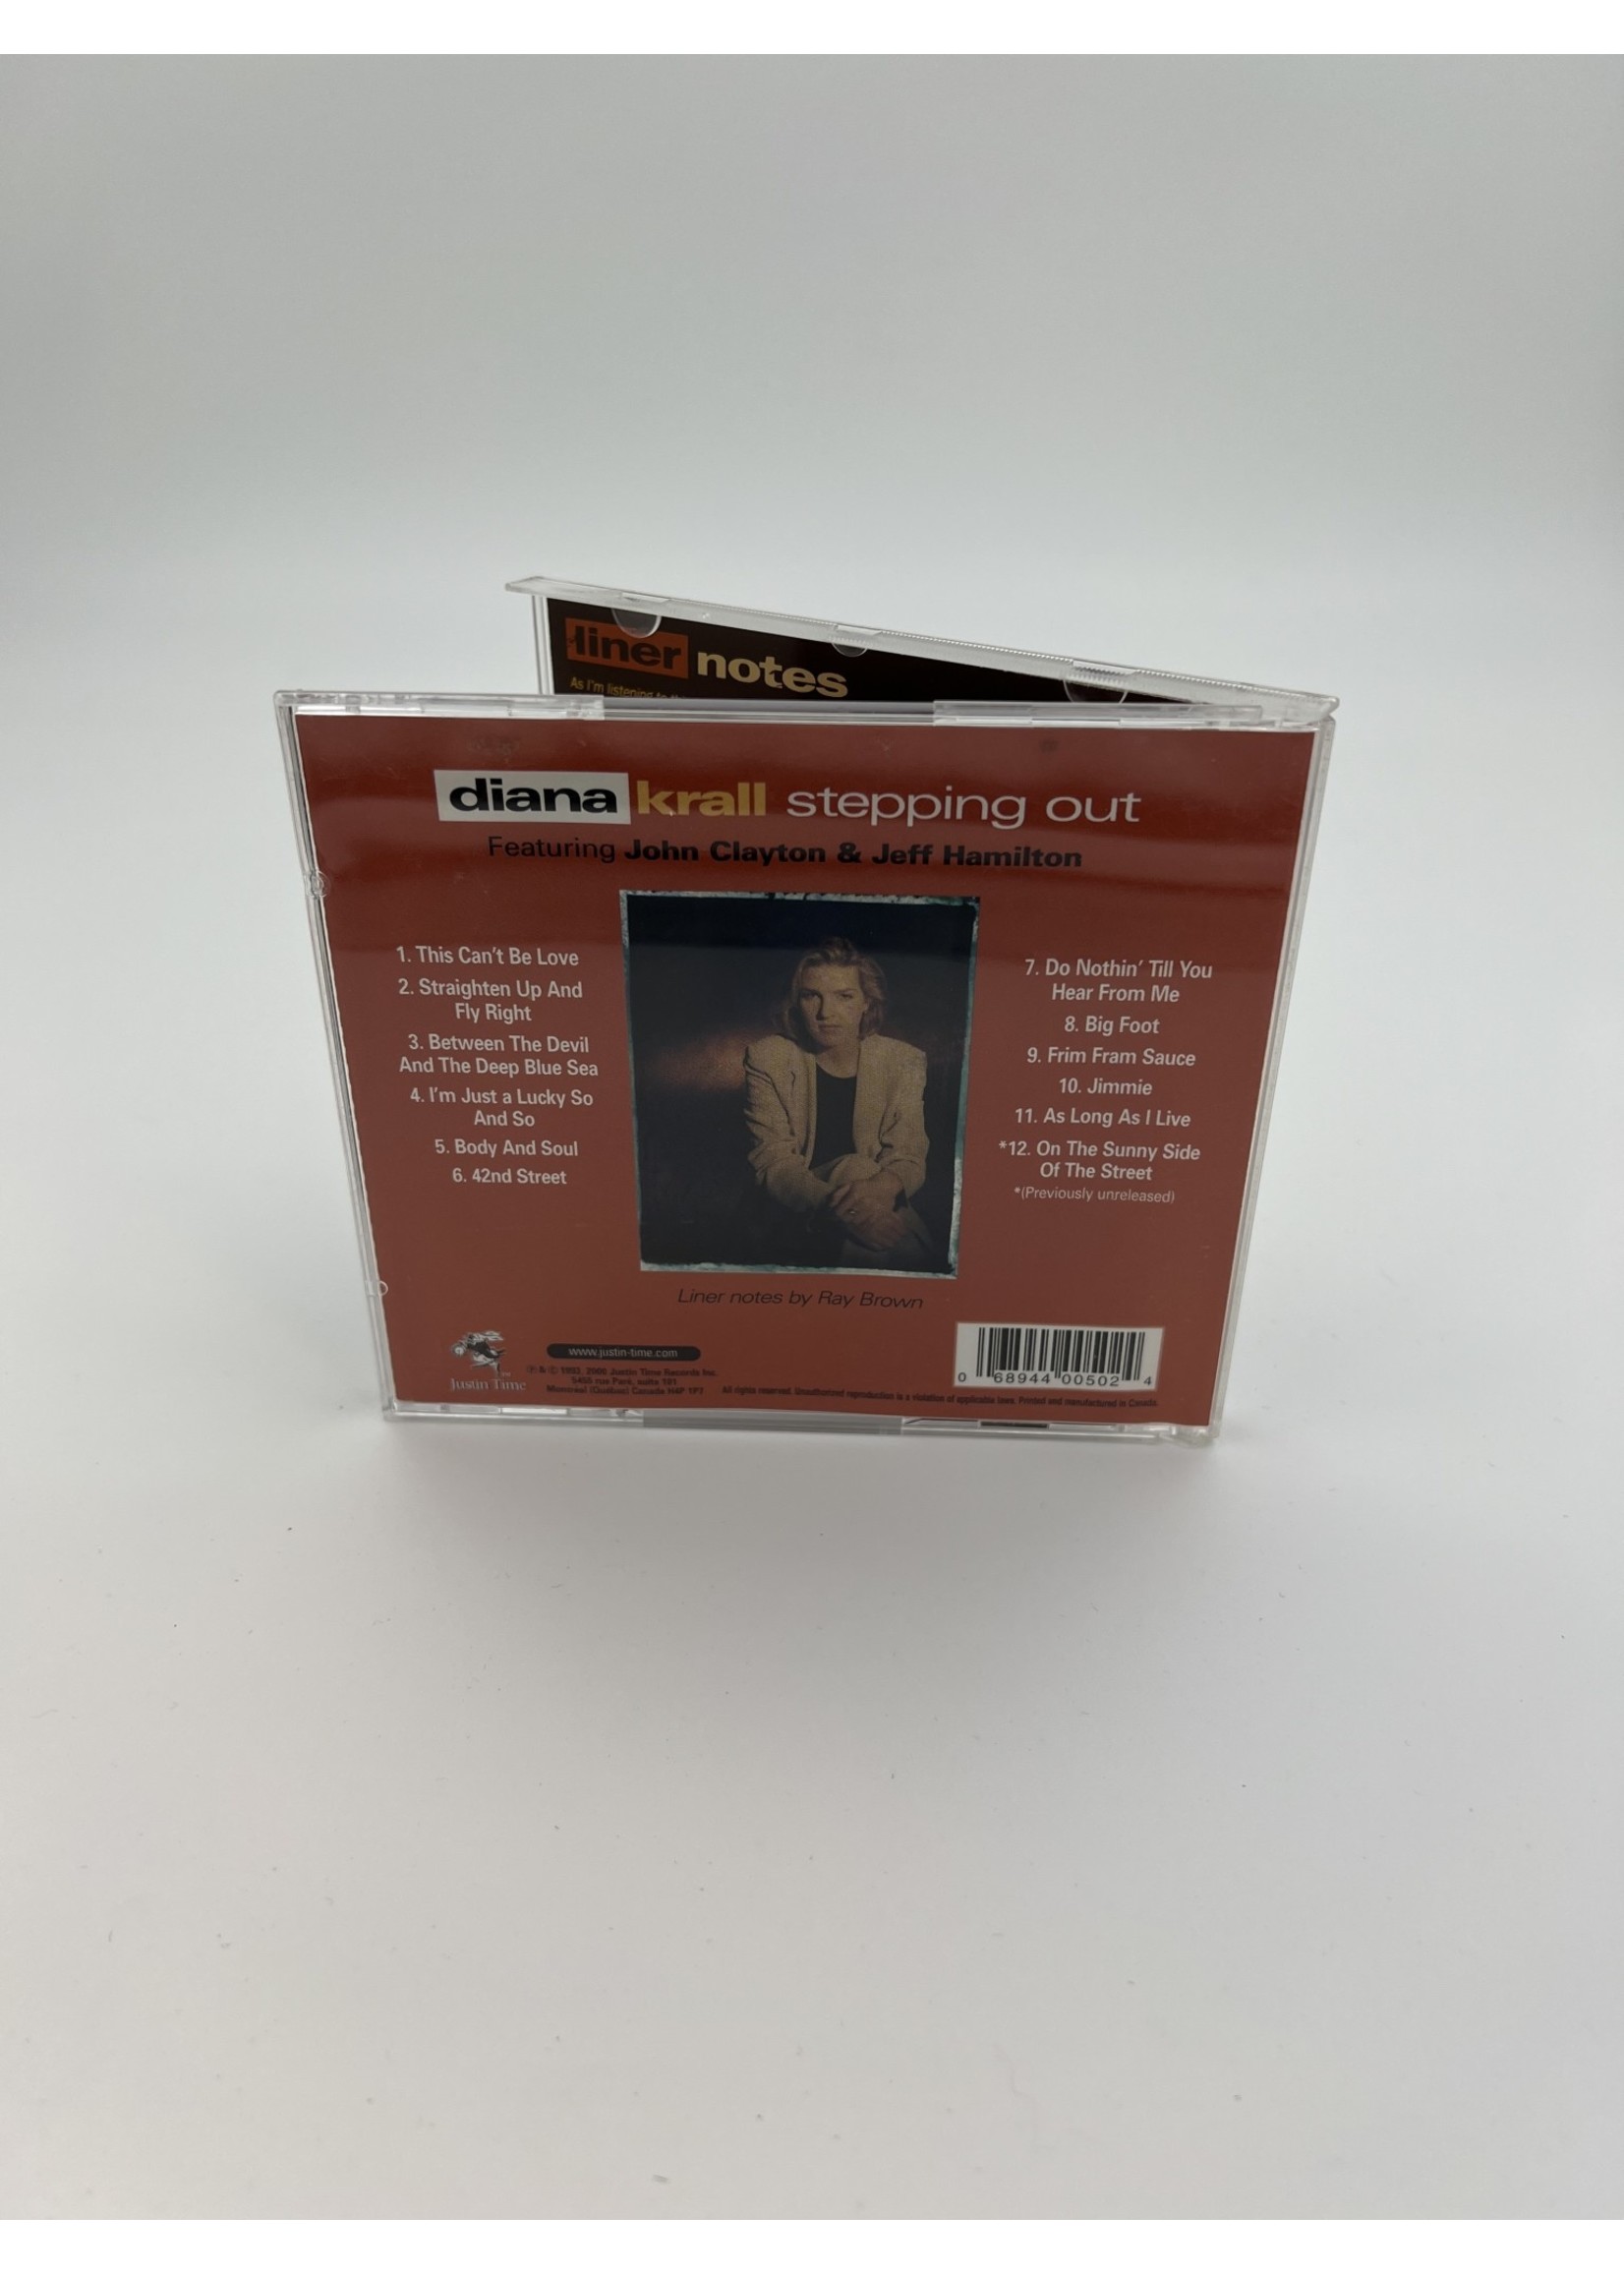 CD Diana Krall Stepping Out Cd